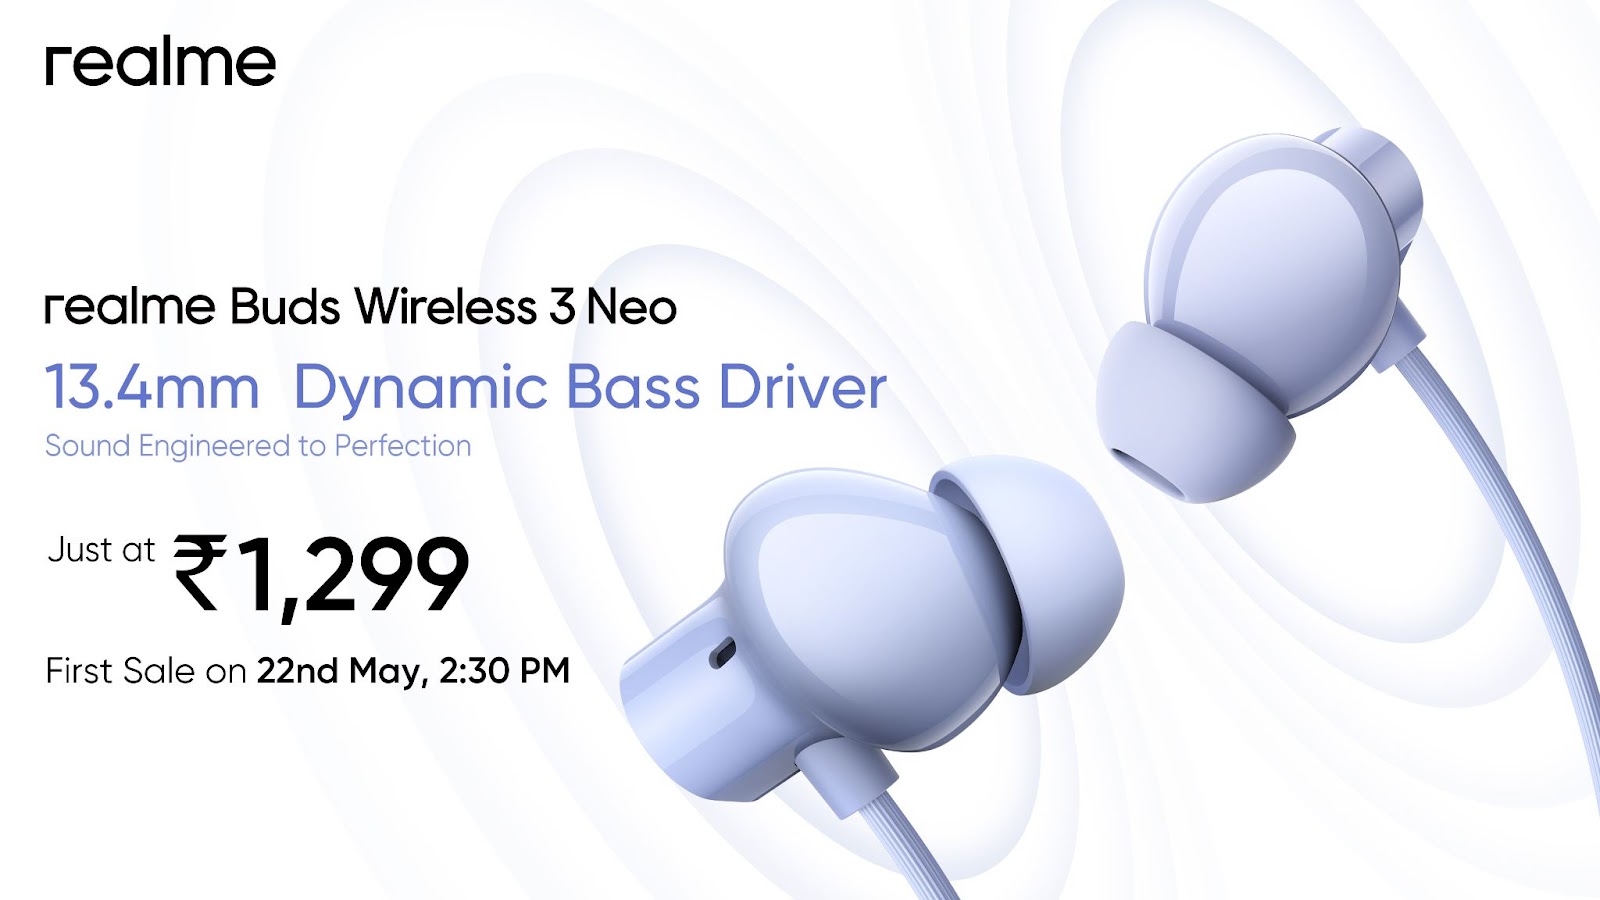 Realme to Launch Buds Wireless 3 Neo on May 22 for INR 1,299